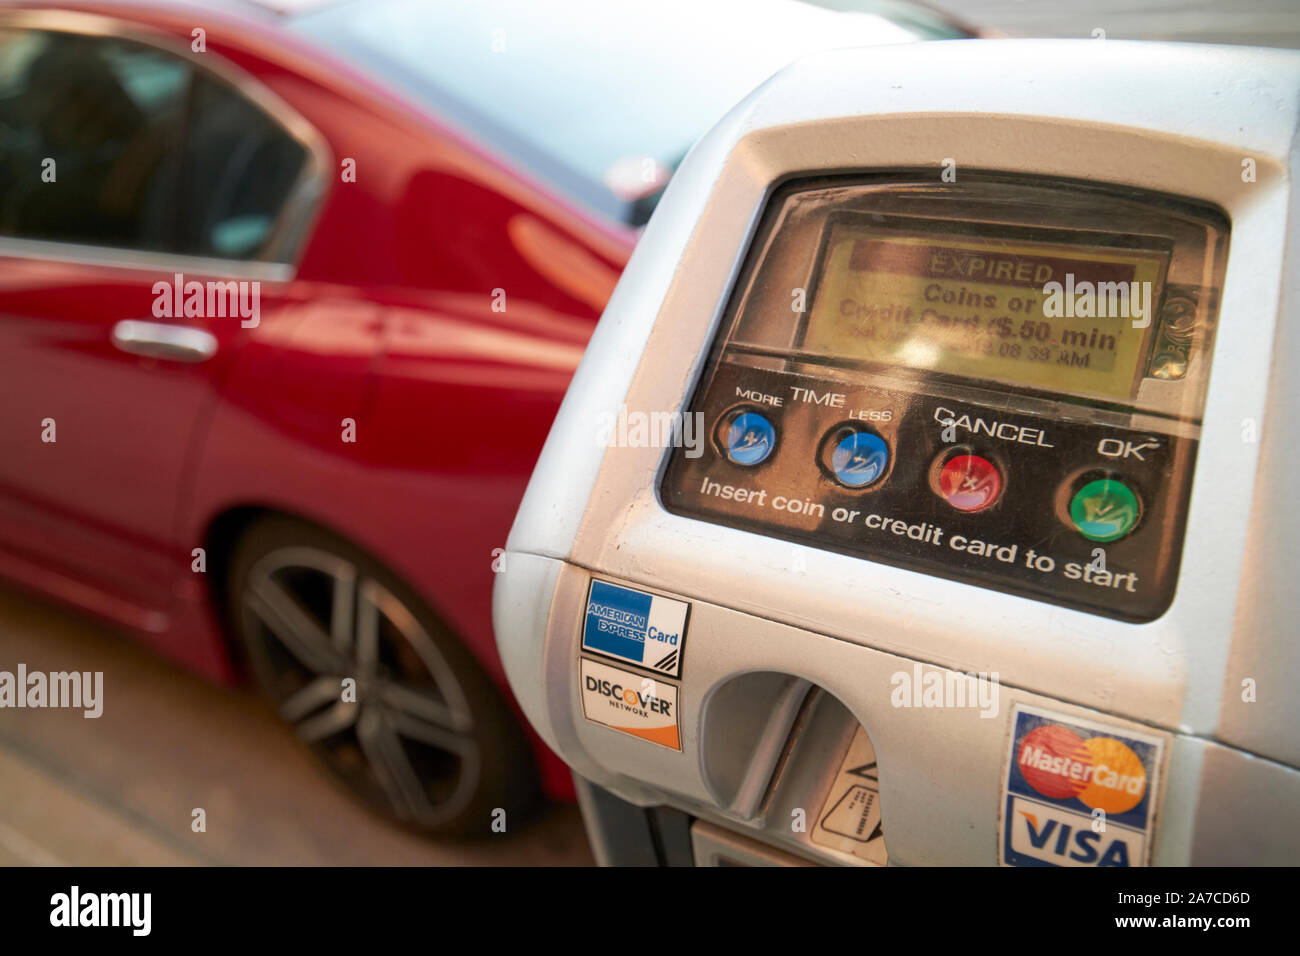 coin or credit card operated on street parking meter with time expired louisville kentucky USA Stock Photo